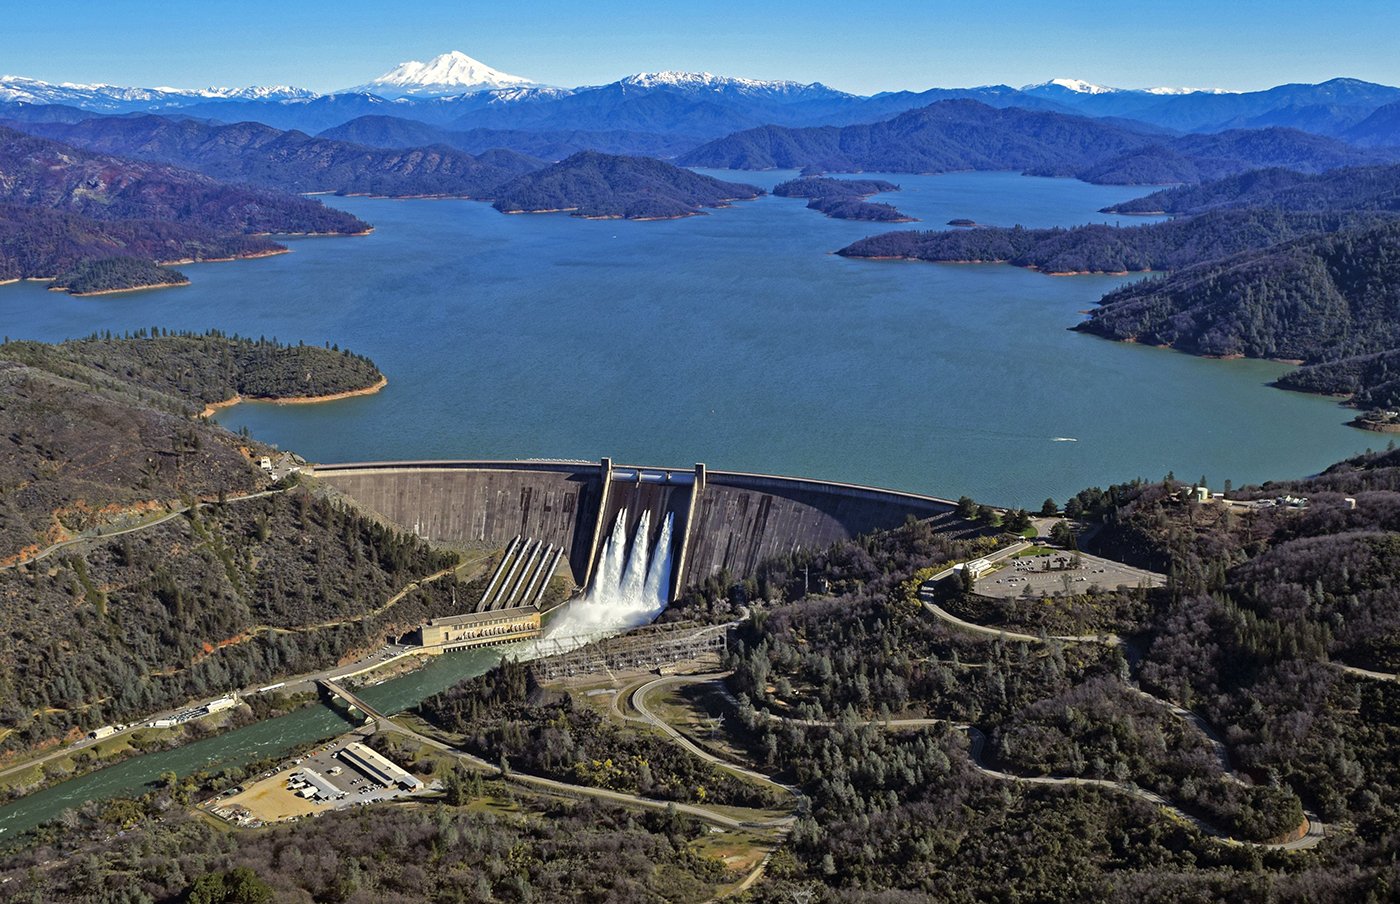  Shasta Lake, CA — Aerial view of Shasta Dam with Mt. Shasta in the background. March 11, 2019. Photo: U.S. Bureau of Reclamation 